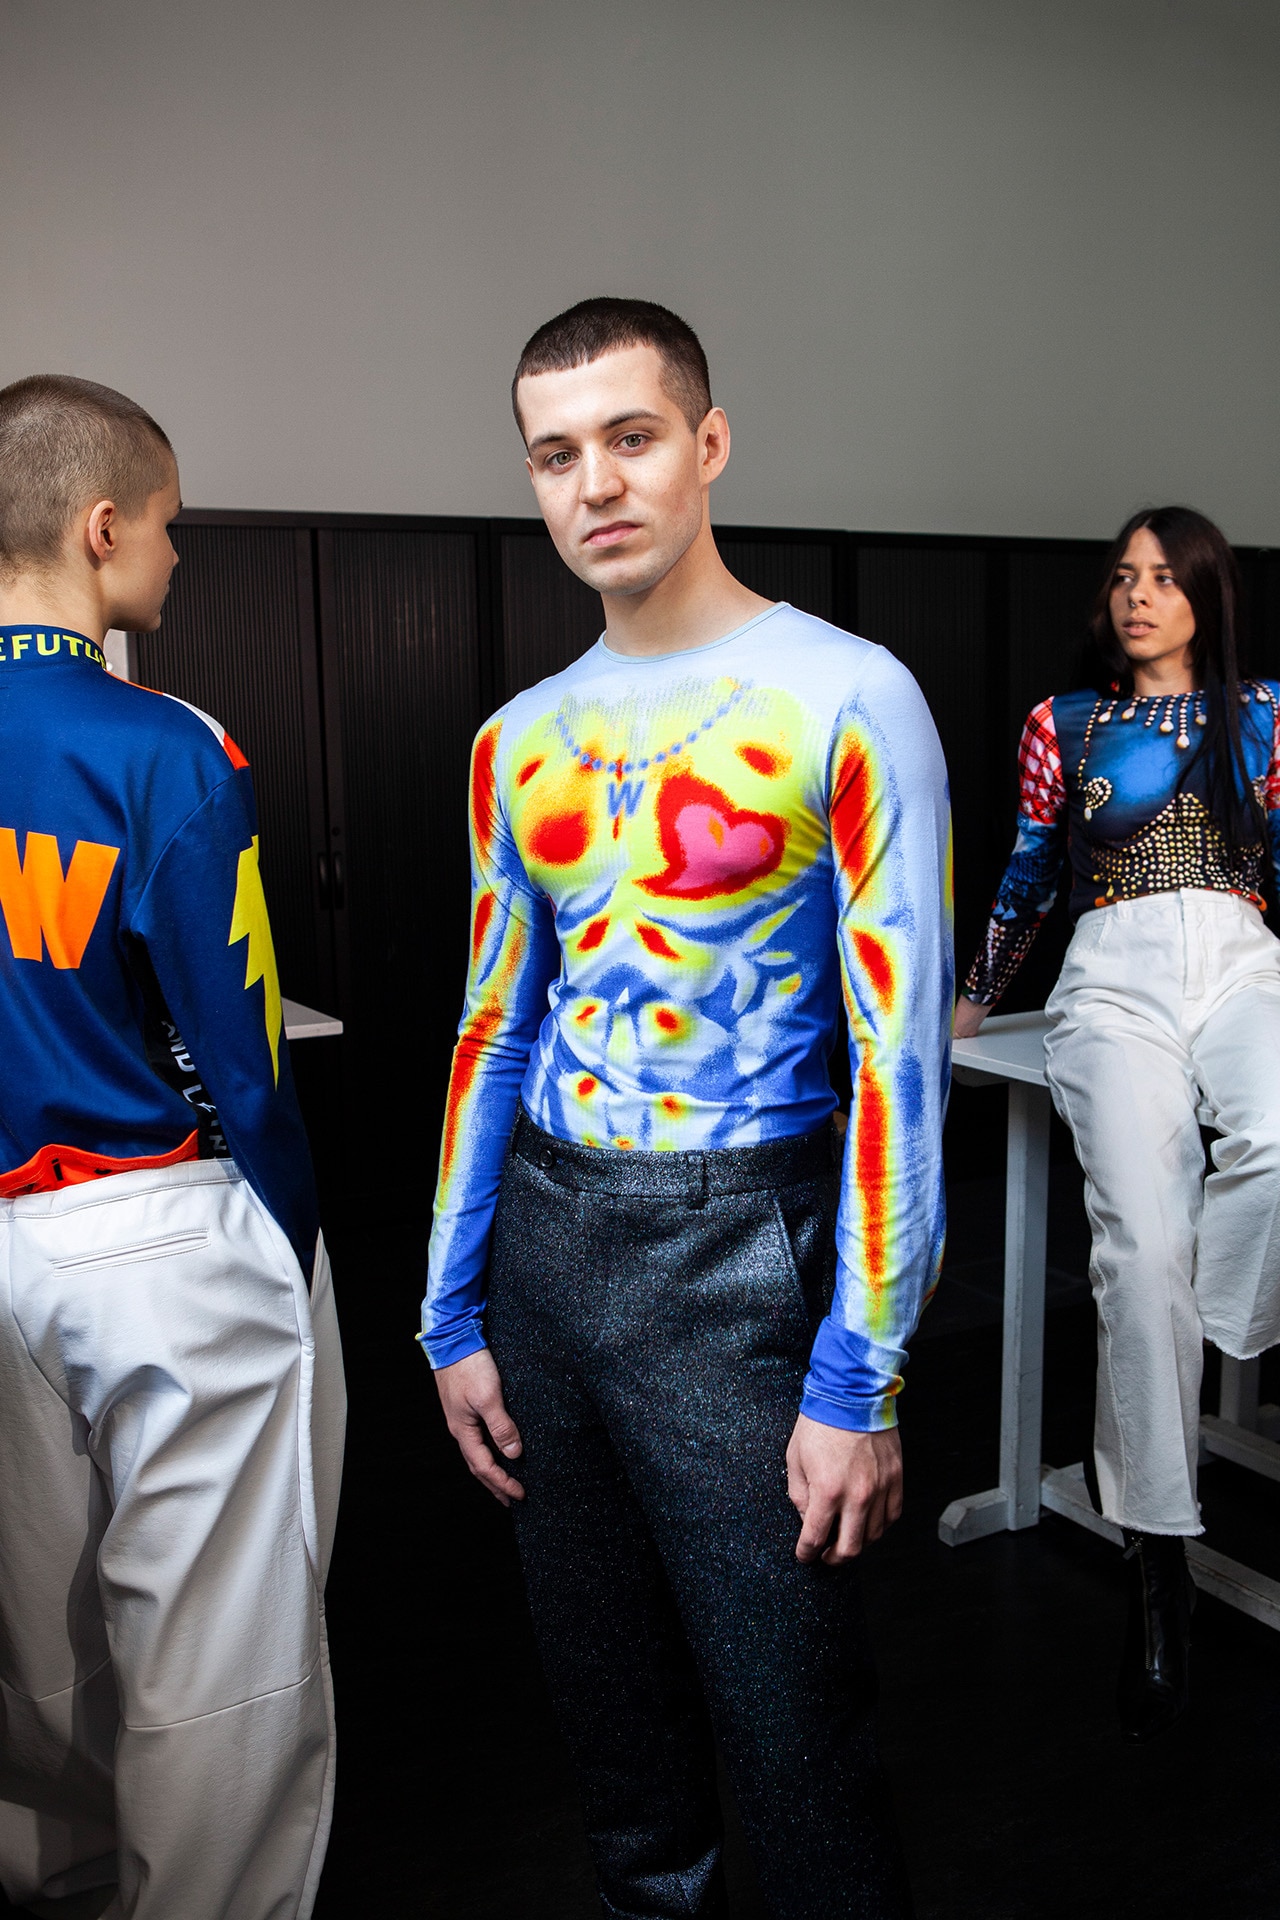 Walter Van Beirendonck Teams Up with House of Liza and Farfetch to